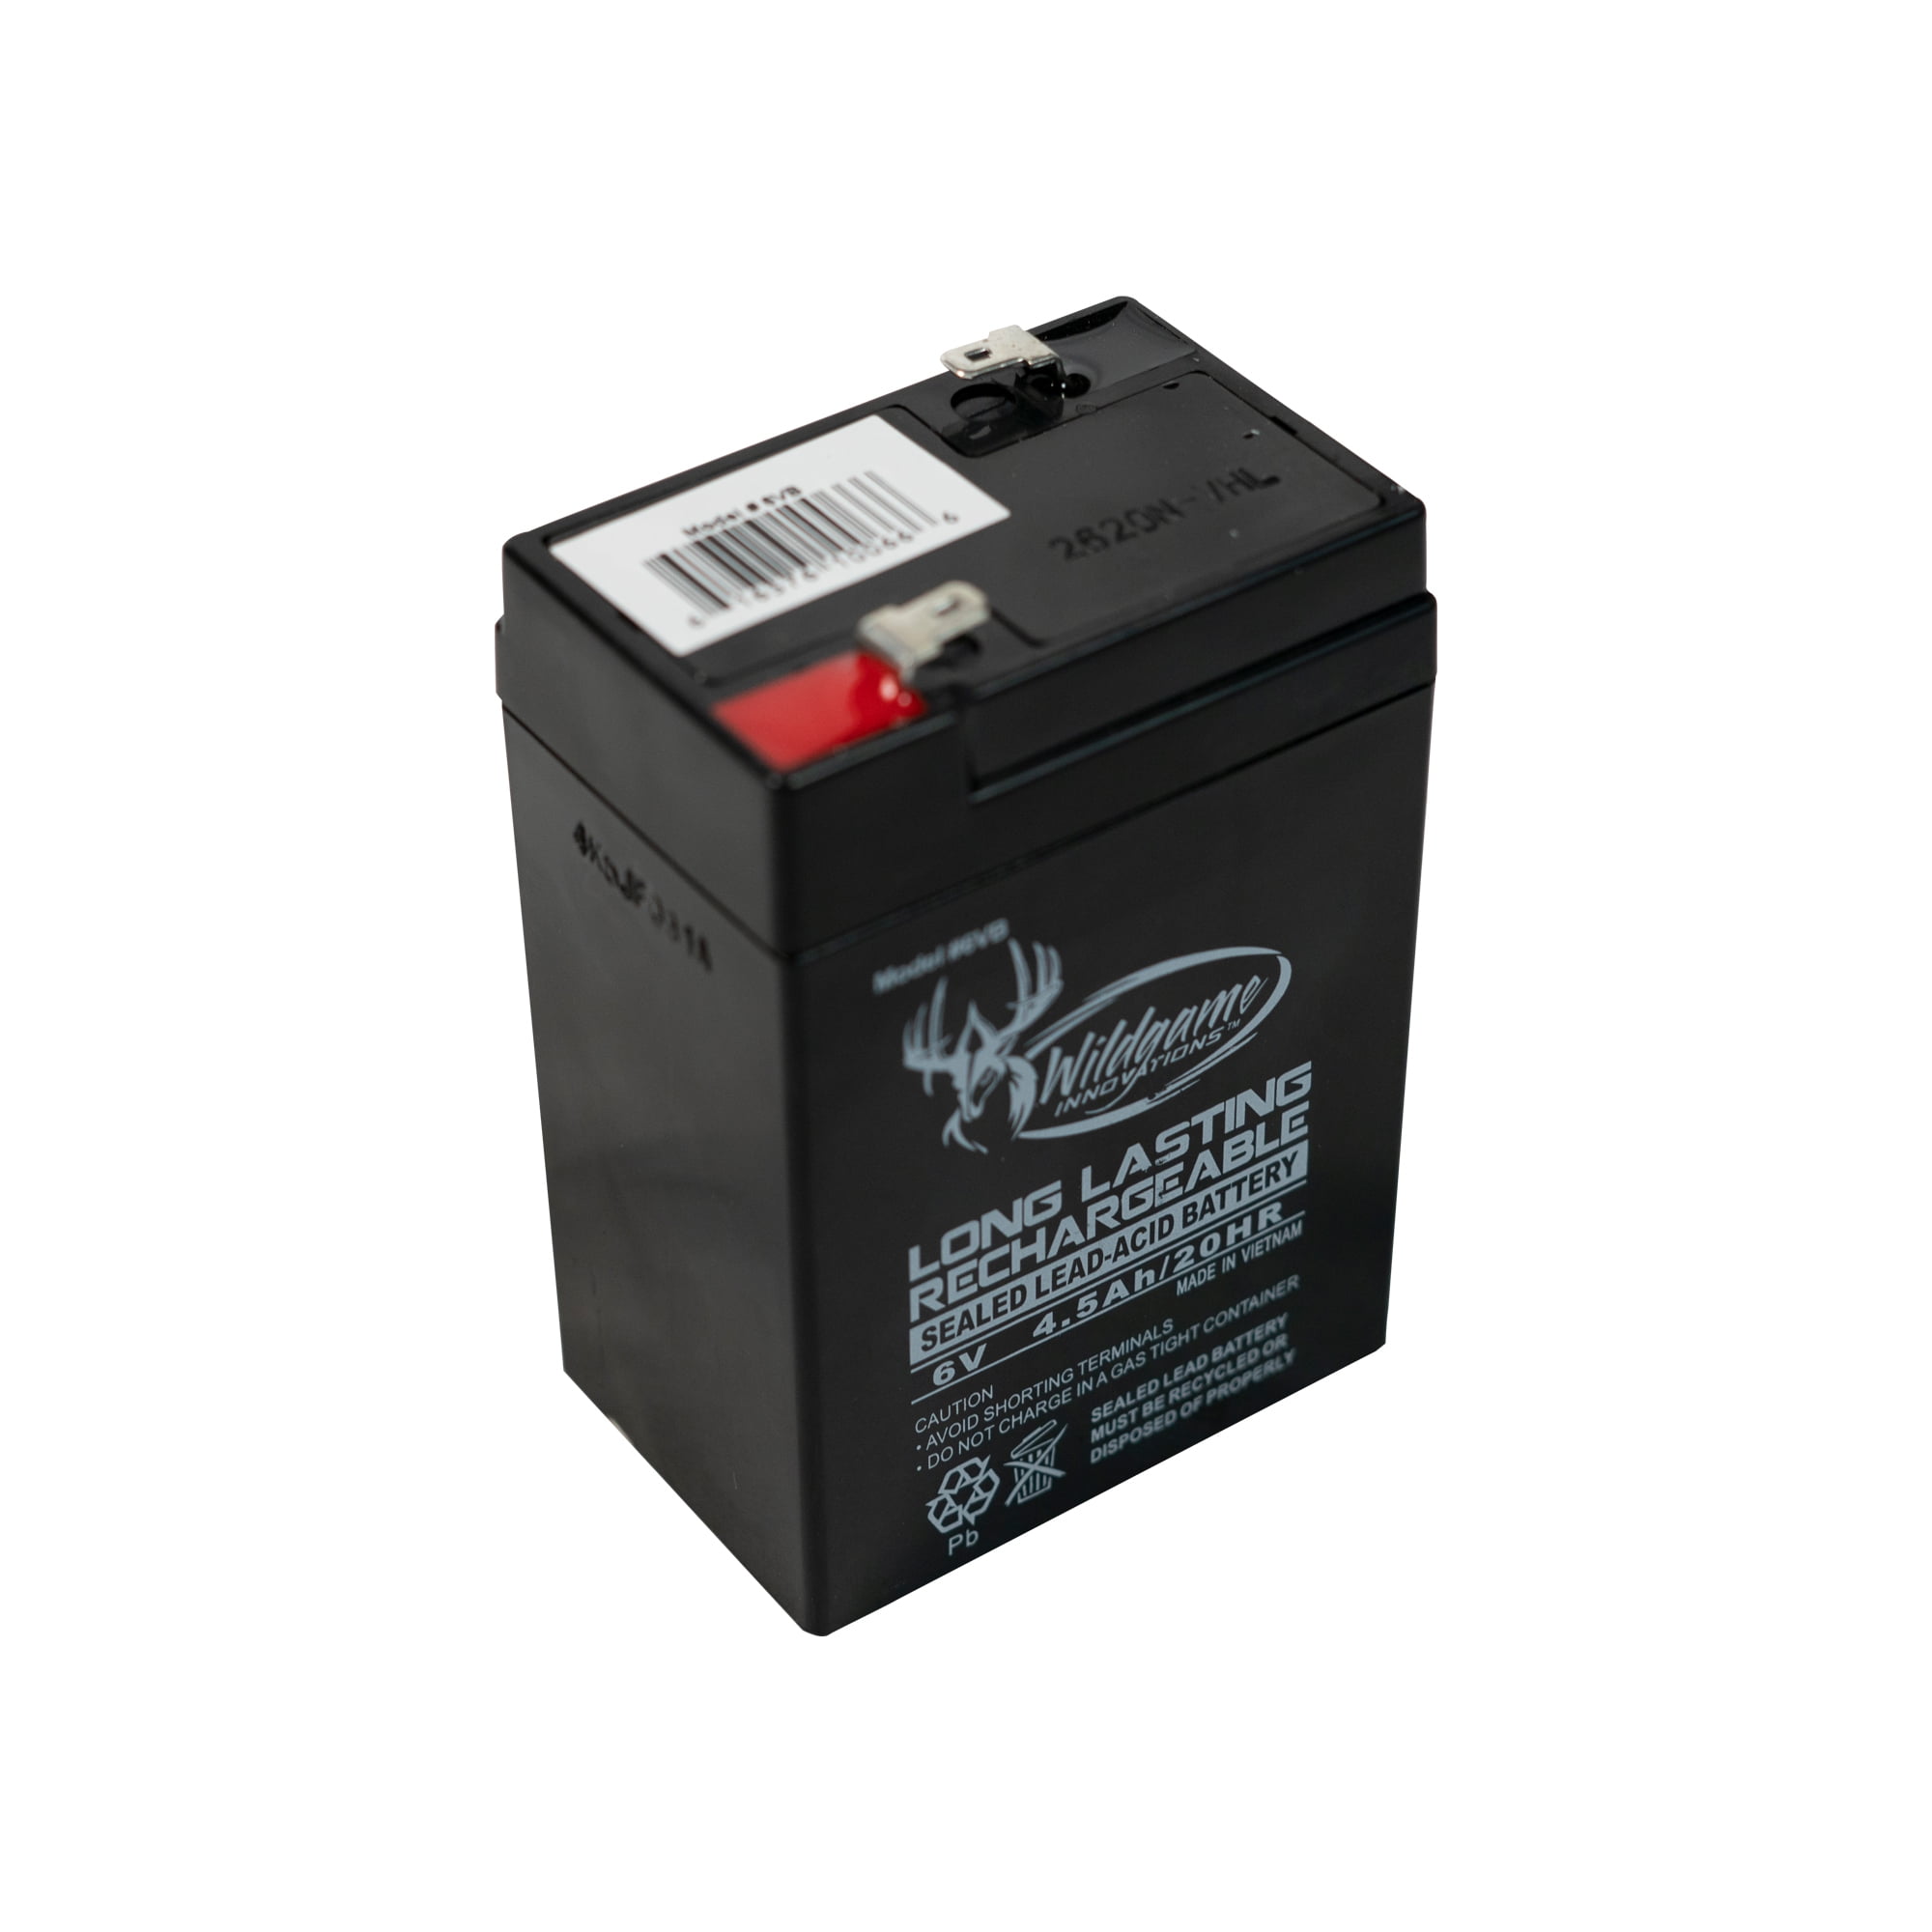 WILD GAME INNOVATIONS 6VB 6 VOLT RECHARGABLE BATTERY 4.5A 